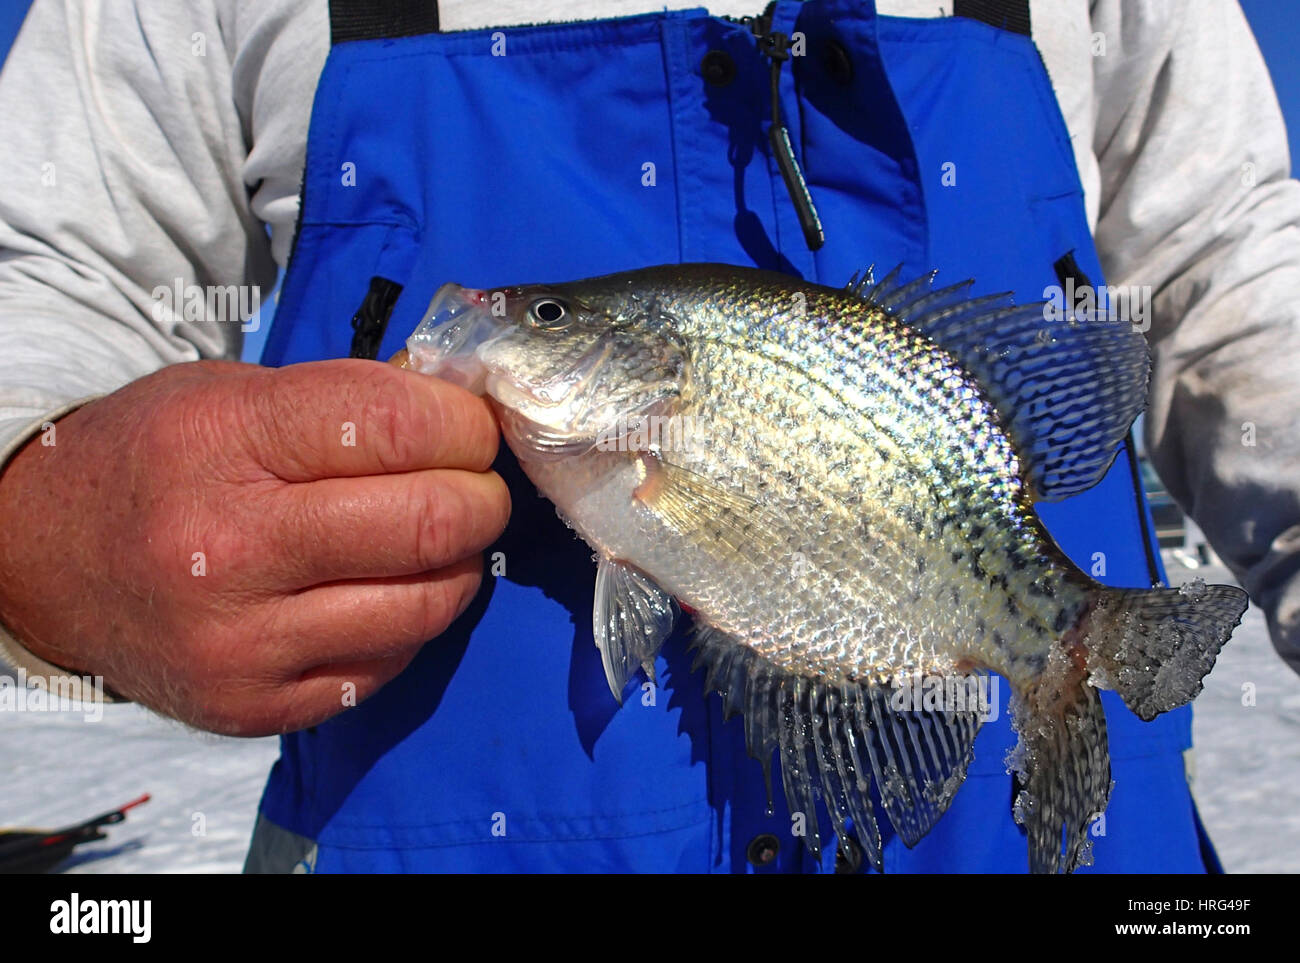 Fisherman holding a Crappie caught while ice fishing Stock Photo